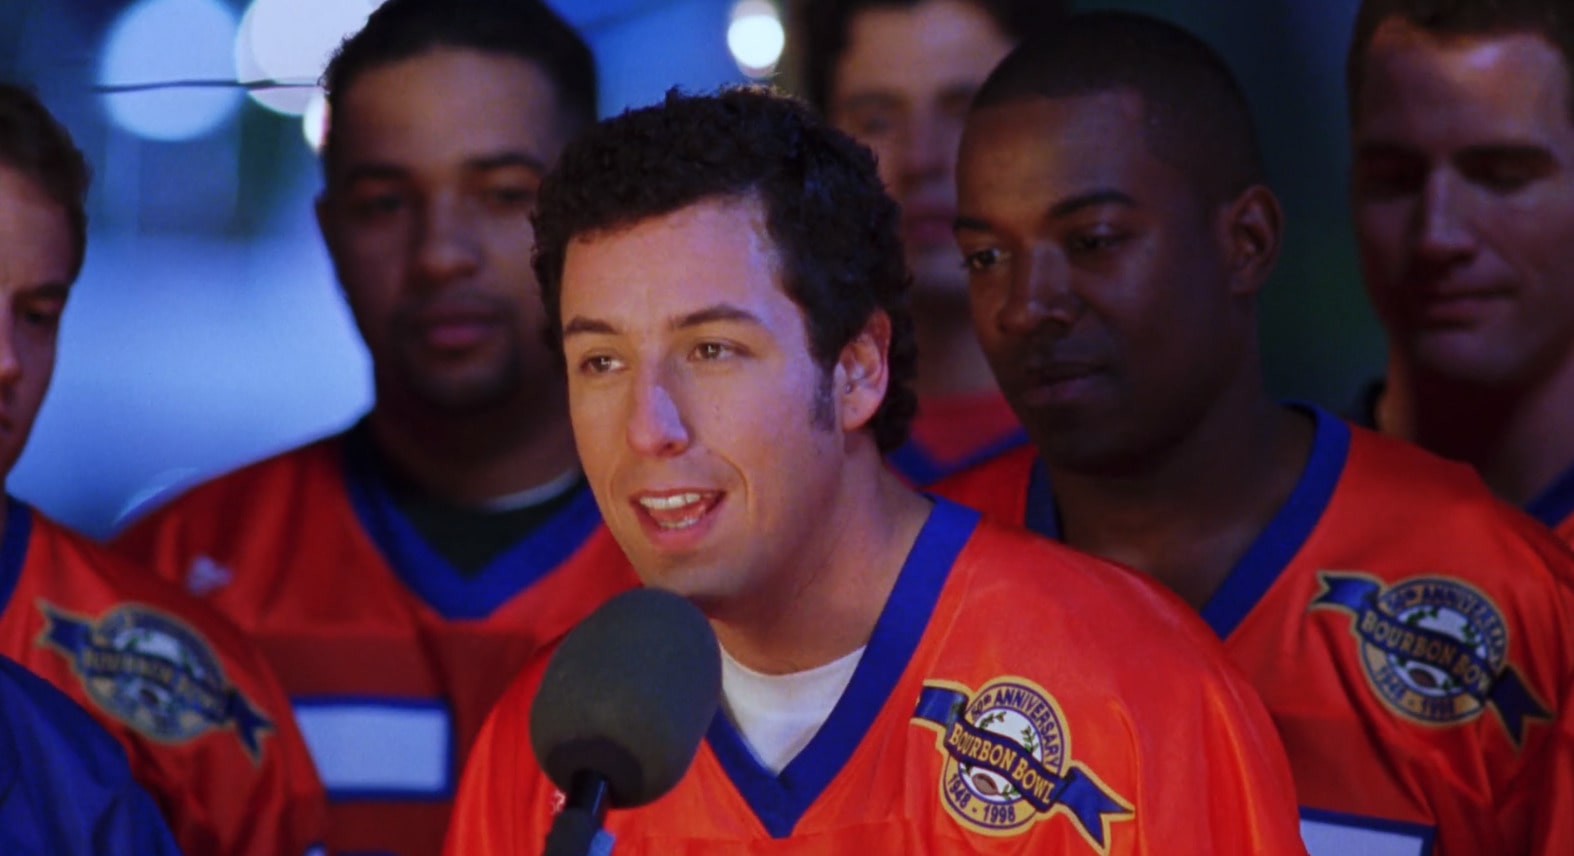 Adam Sandler as Bobby Boucher in The Waterboy movie motivating his team